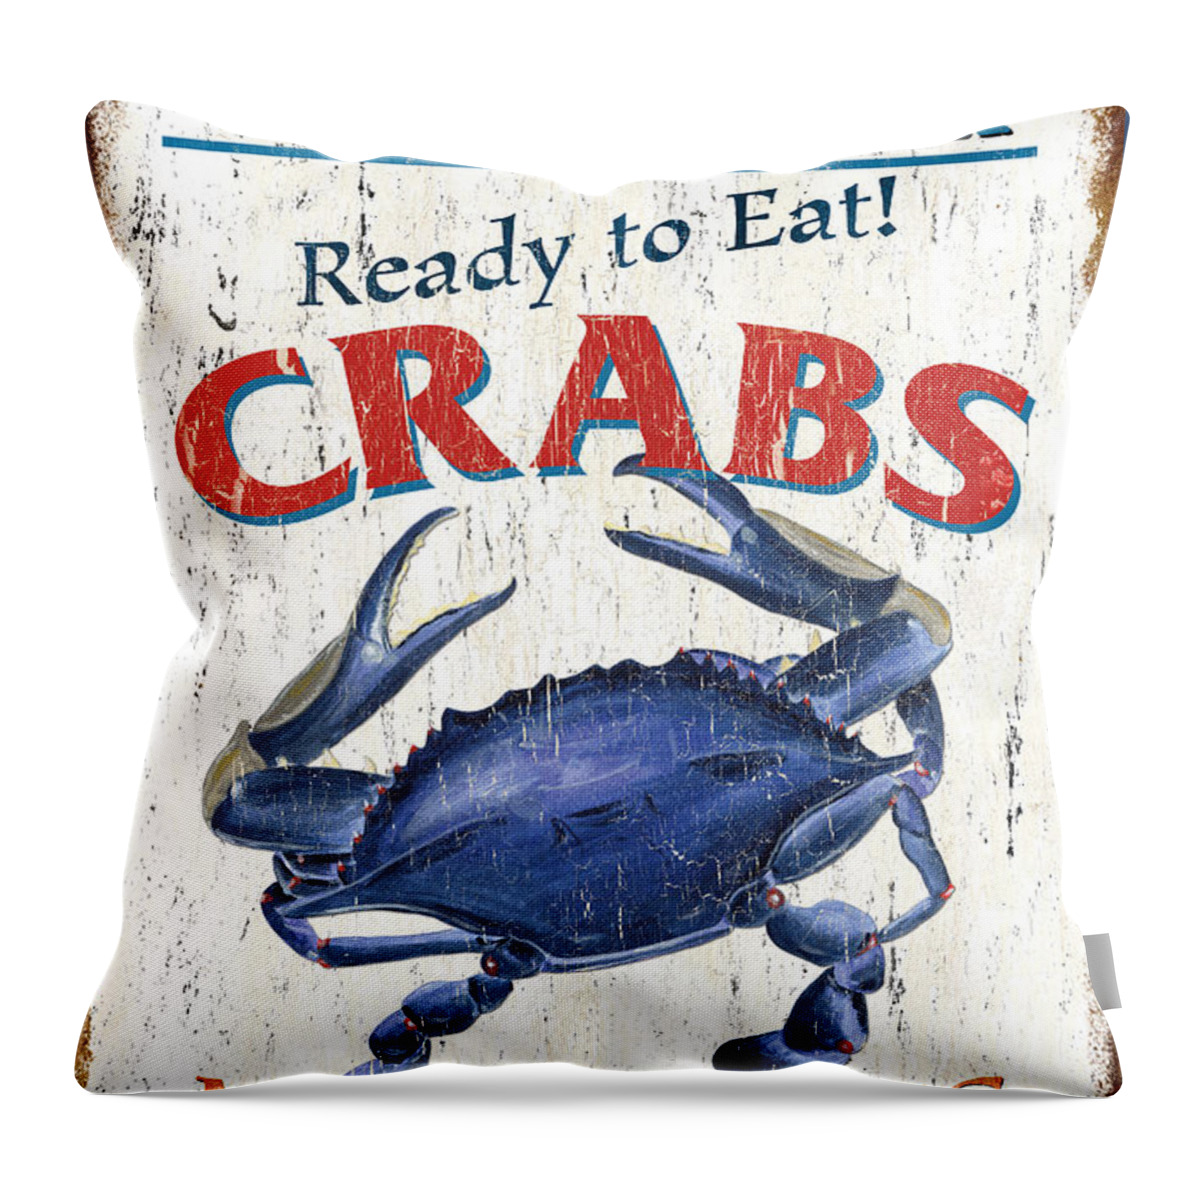 Crab Throw Pillow featuring the painting The Crab Shack by Debbie DeWitt